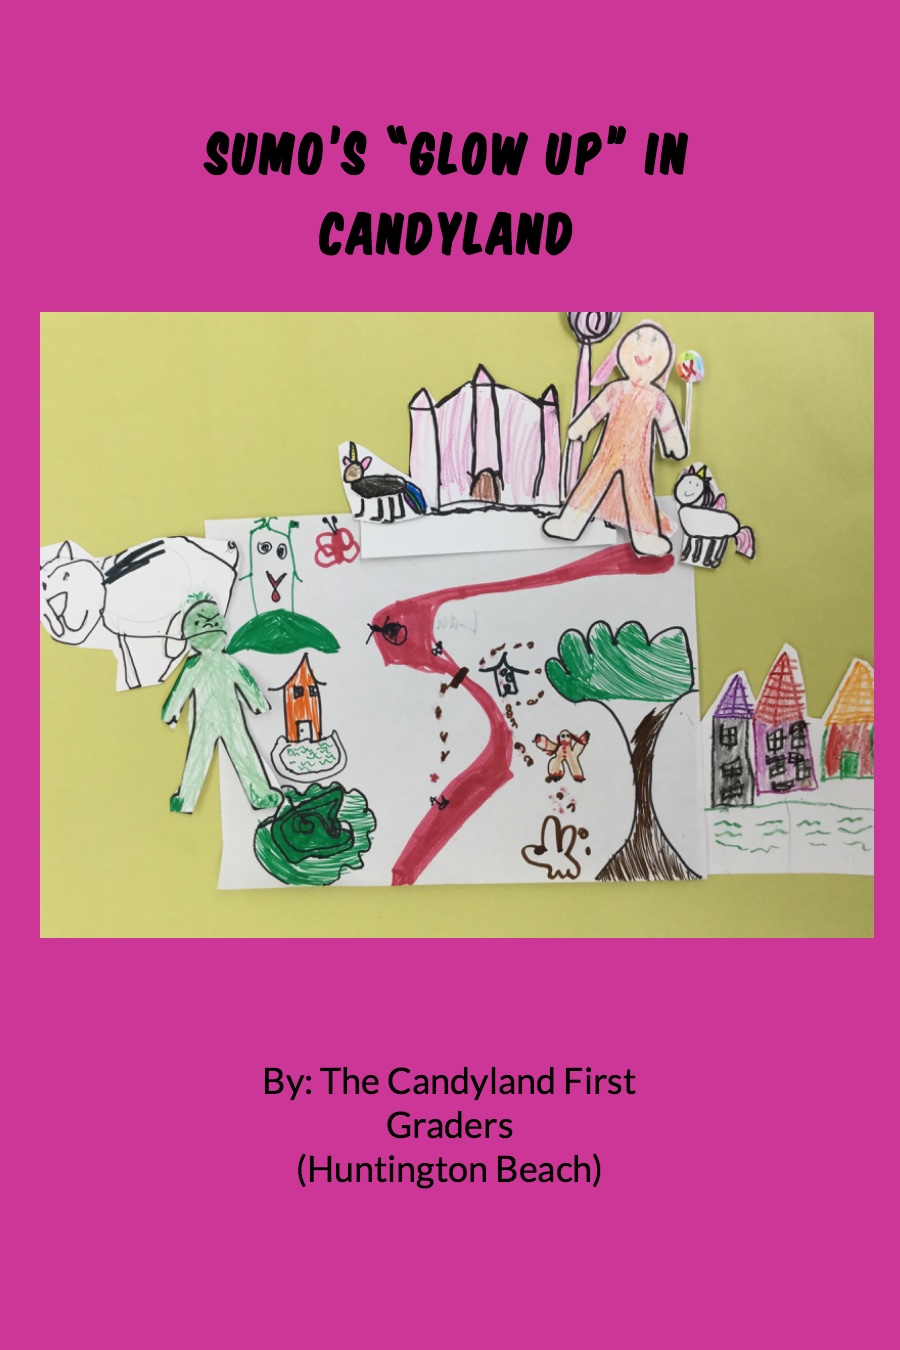 Sumos glow up in candyland by HB first grade-1